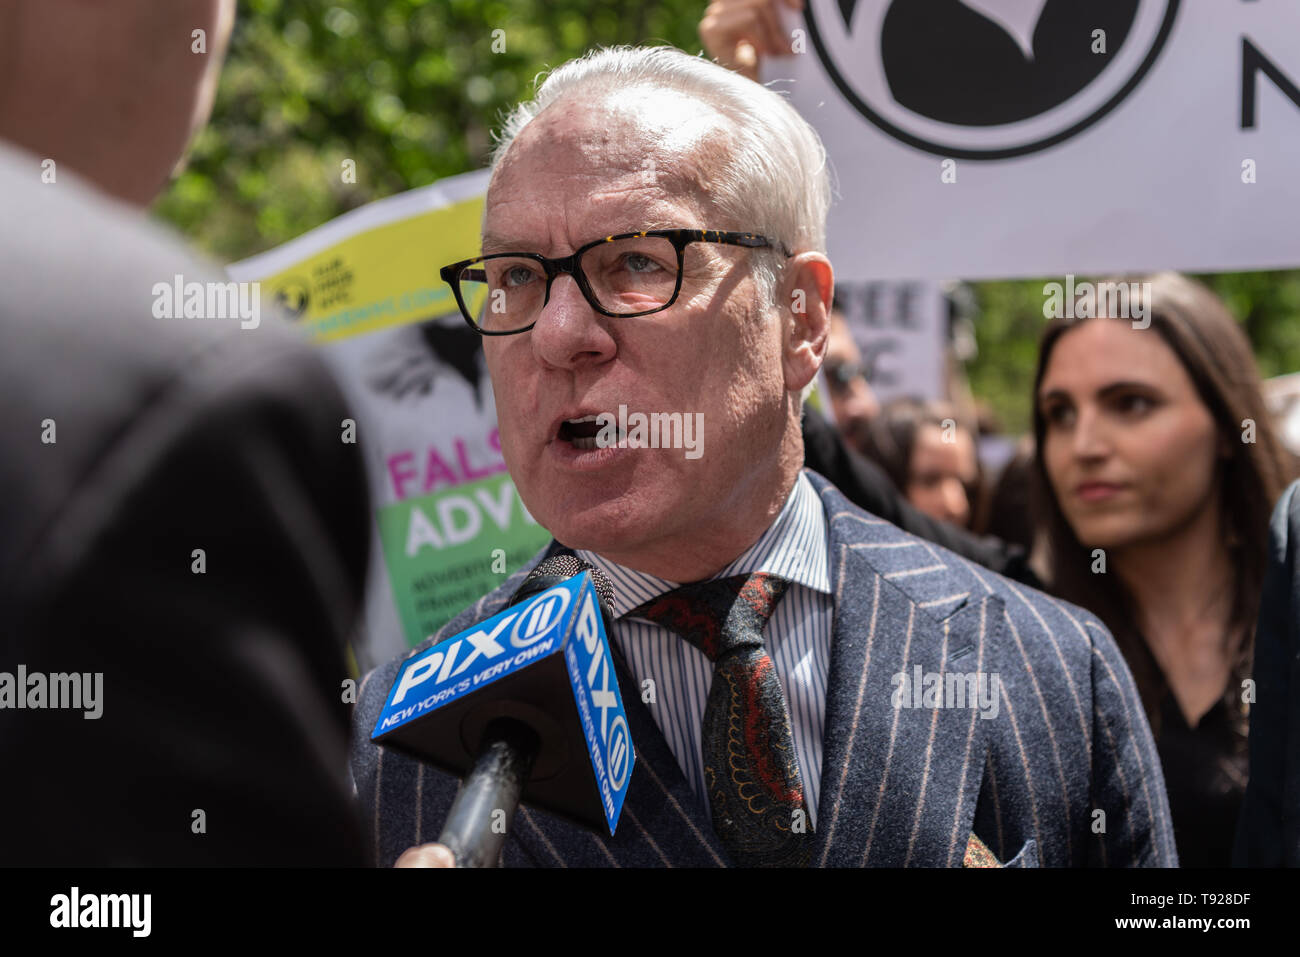 New York, United States. 15th May, 2019. Anti-fur activists rallied in front of City Hall in New York City before the scheduled Council hearing to ban the sale of fur in New York City. Opposite the activists, fur store owners alongside their employees rallied against the proposed ban. A ban on fur sales, they fear, would create unemployment and be detrimental to small business owners. Credit: Gabriele Holtermann-Gorden/Pacific Press/Alamy Live News Stock Photo